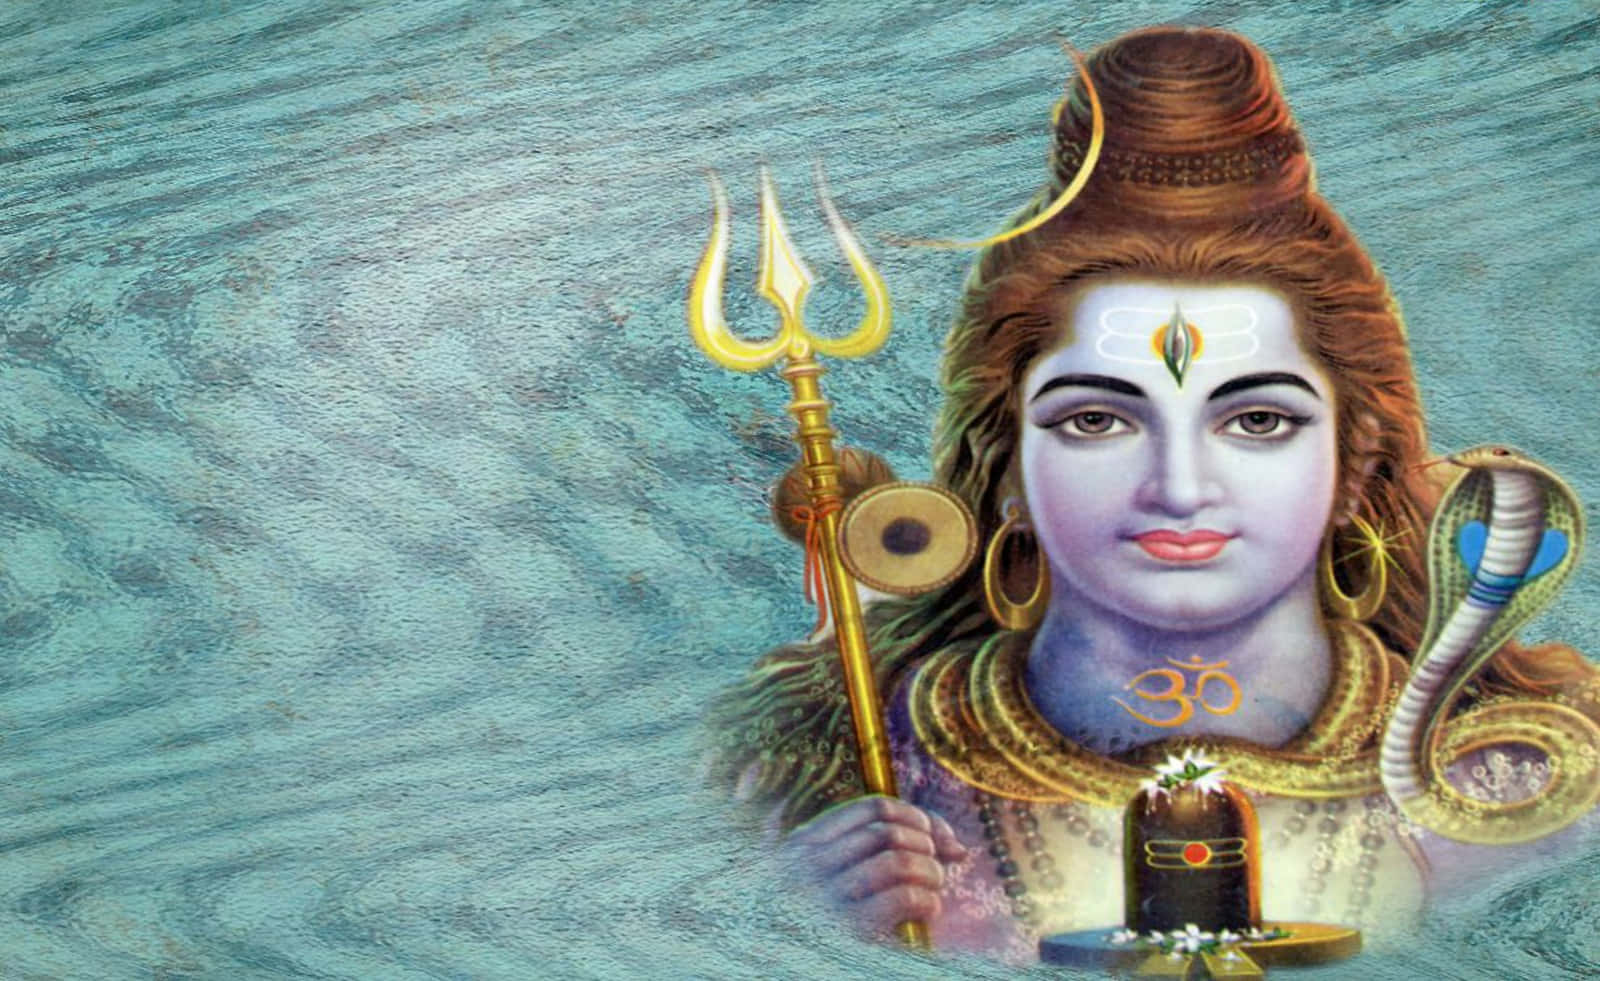 Reverence for Lord Shiva, The Lord of the Universe